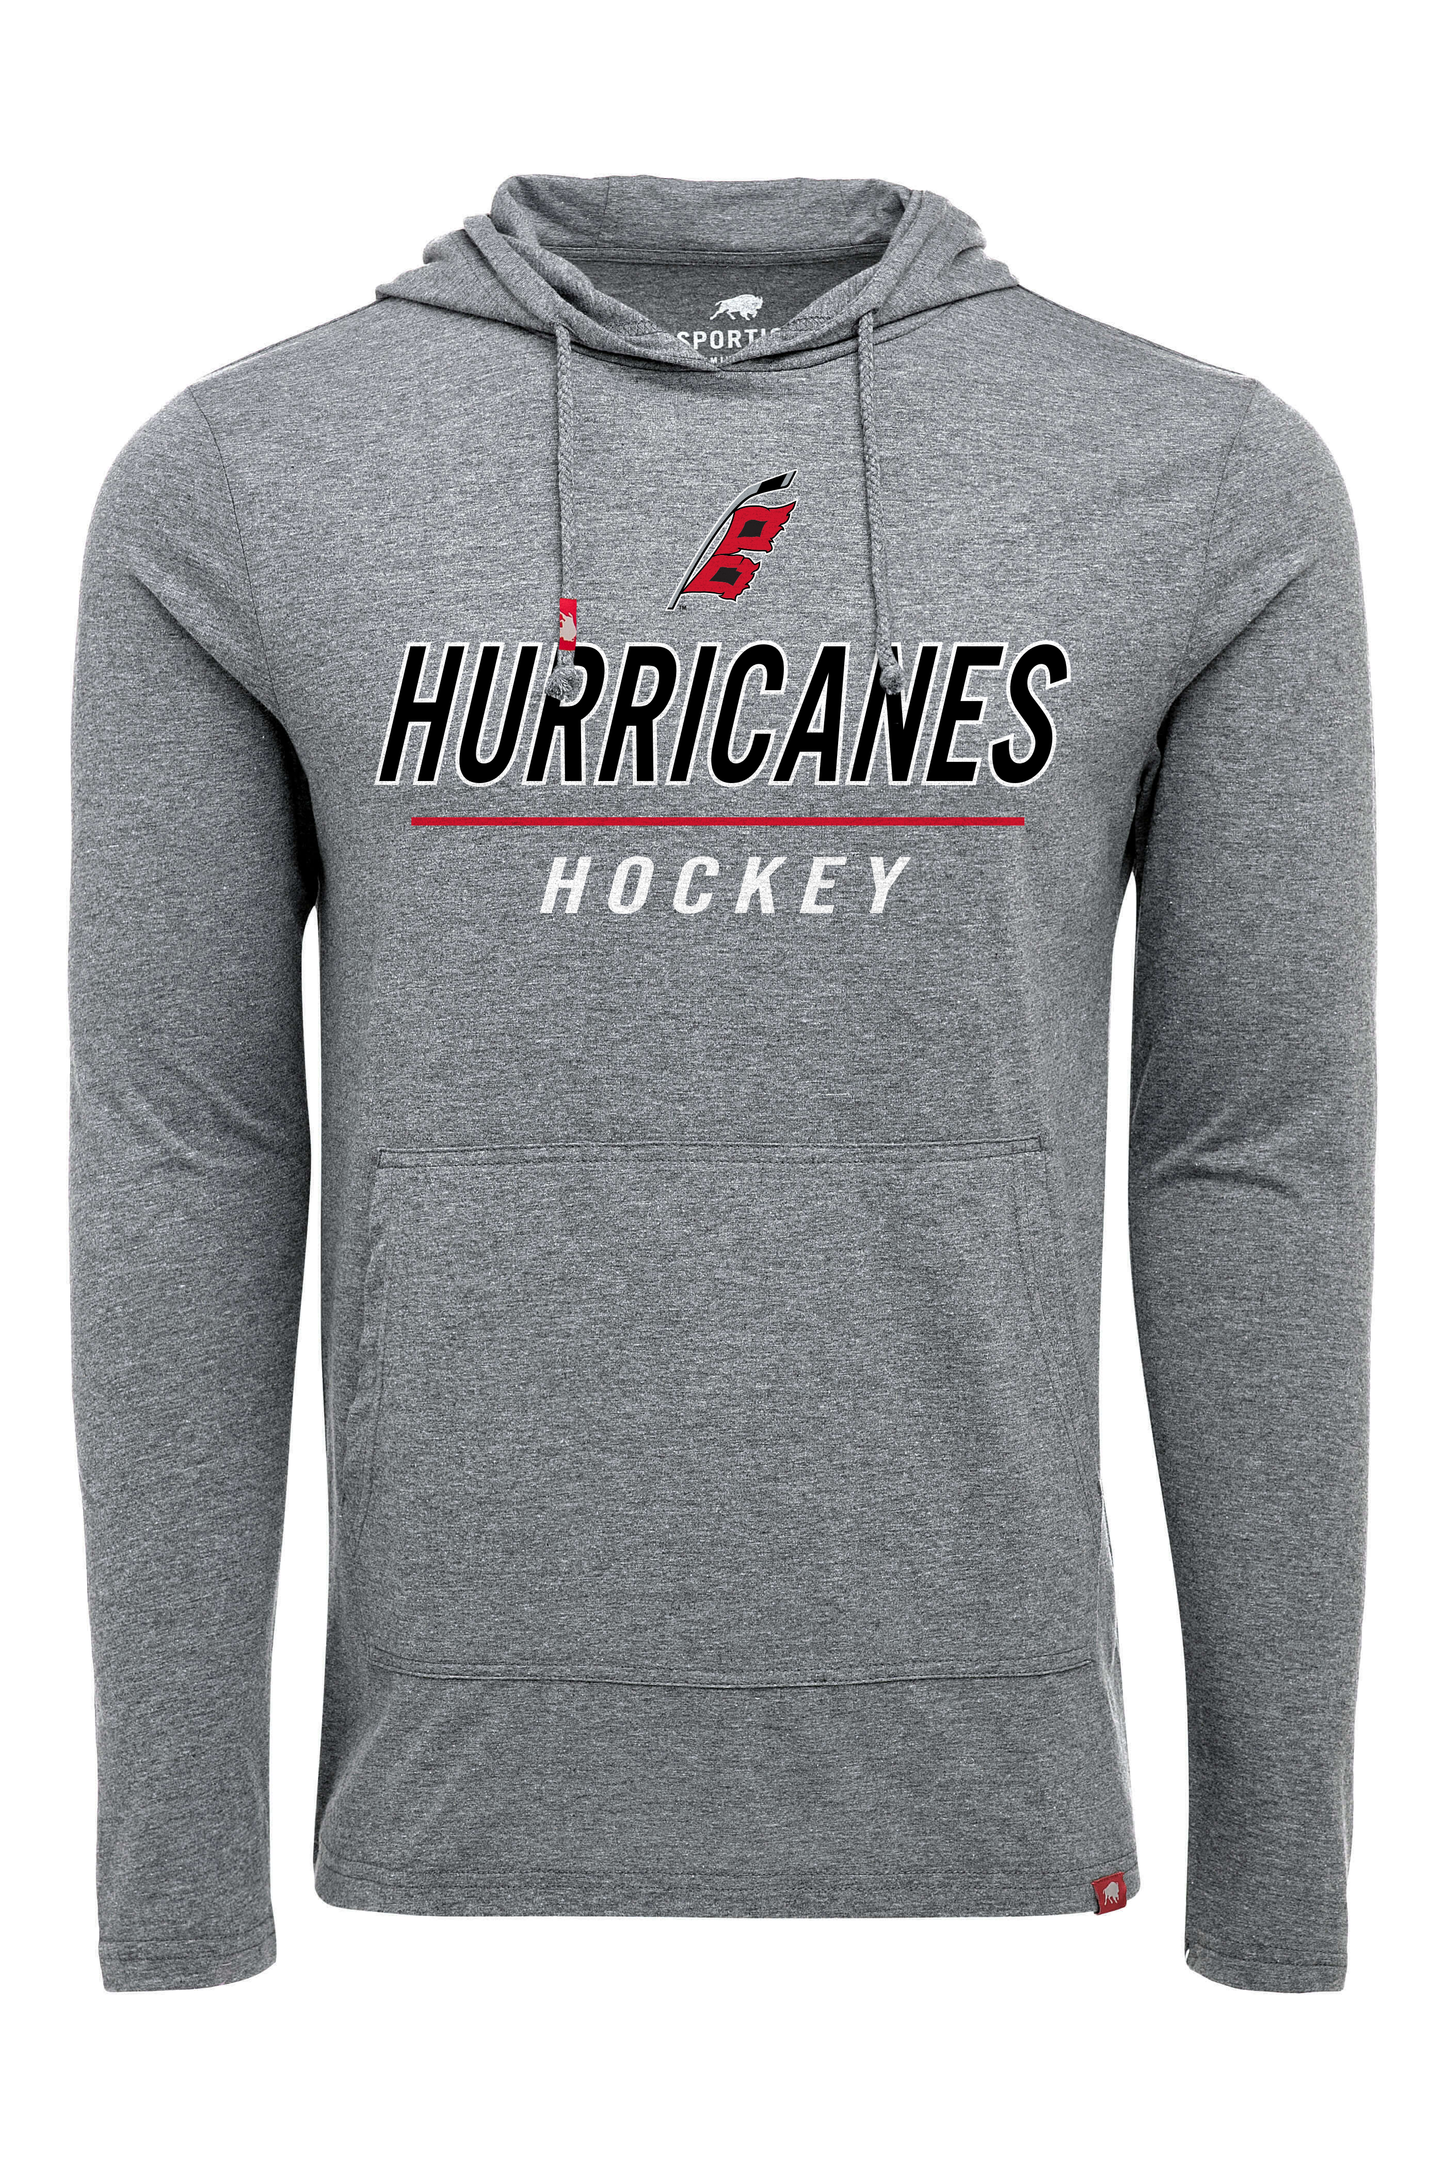 Grey hoodie with Hurricanes Hockey and the Hurricanes flag logo on the front.